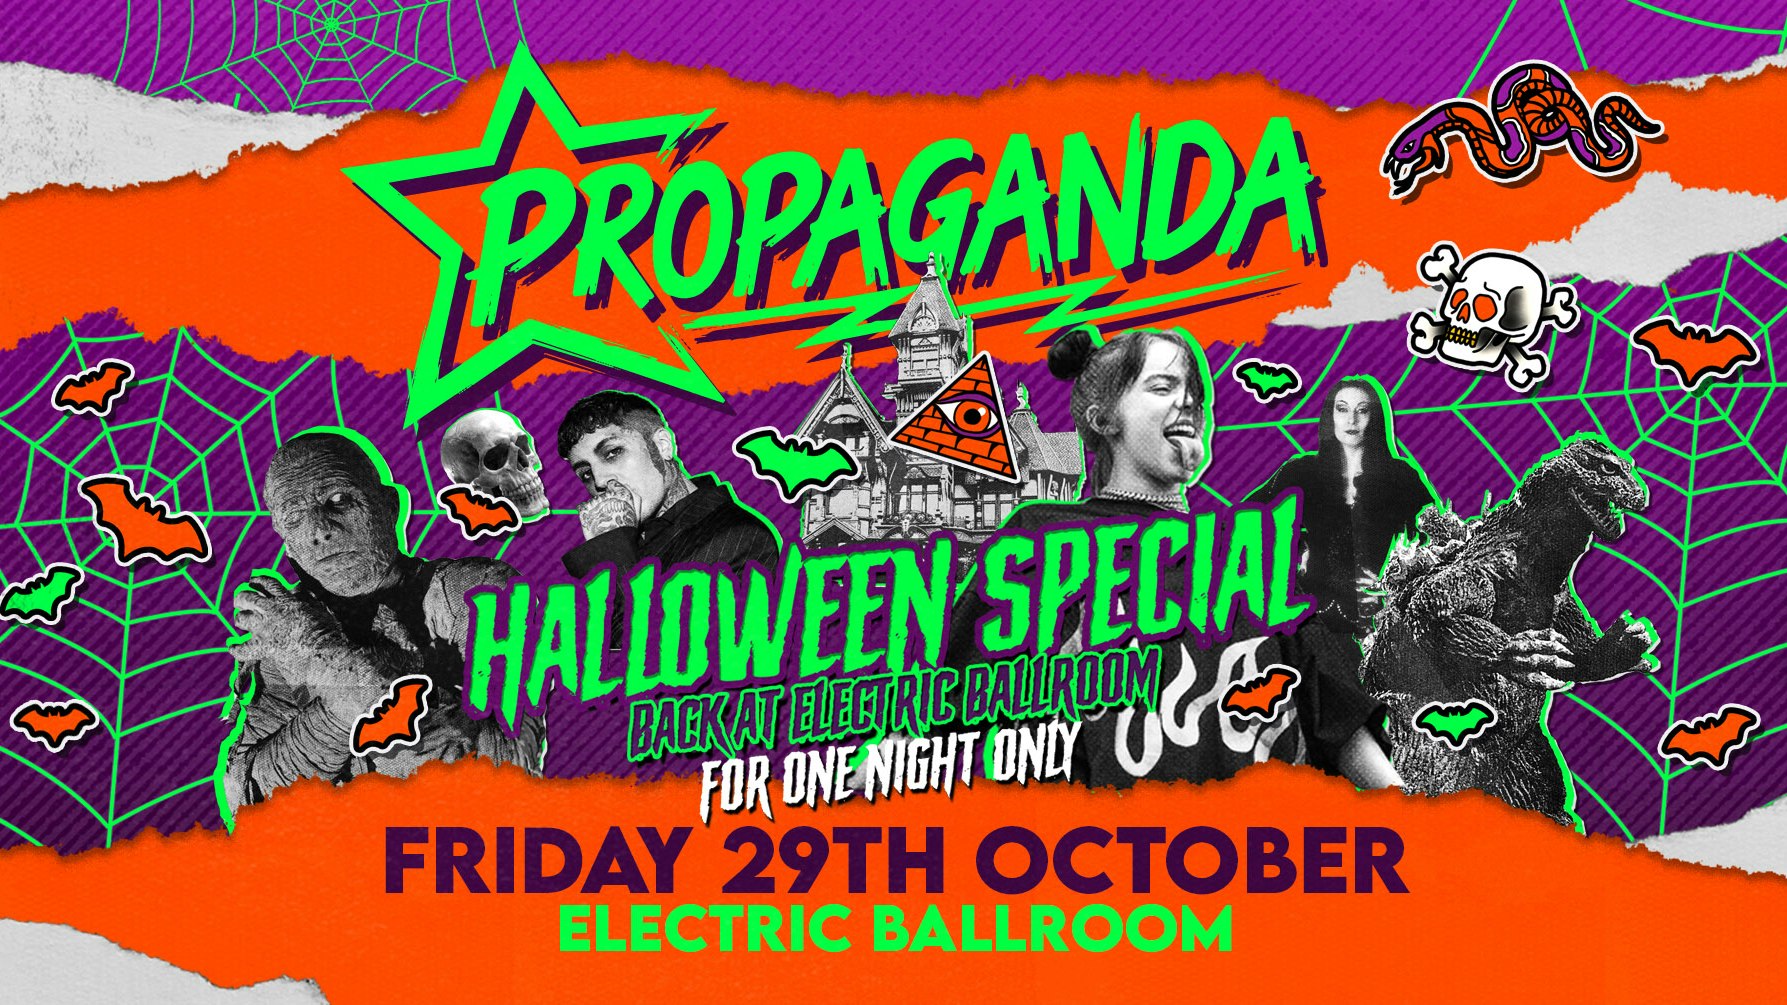 Propaganda London Halloween Special! Back at ELECTRIC BALLROOM for one night only! Friday 29th Oct.